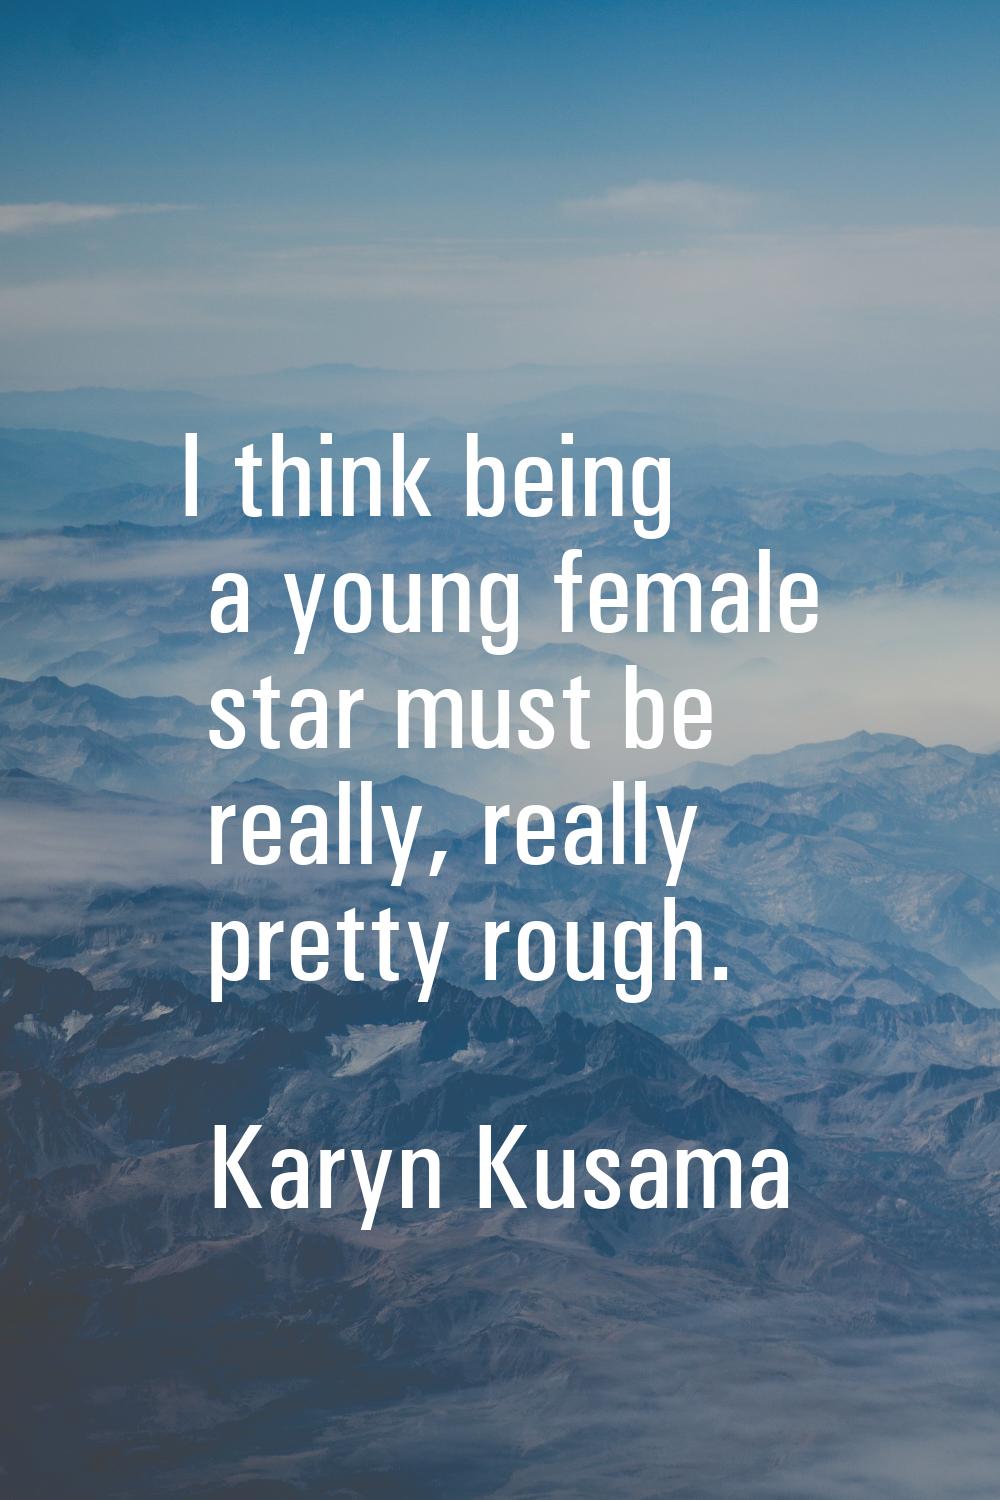 I think being a young female star must be really, really pretty rough.